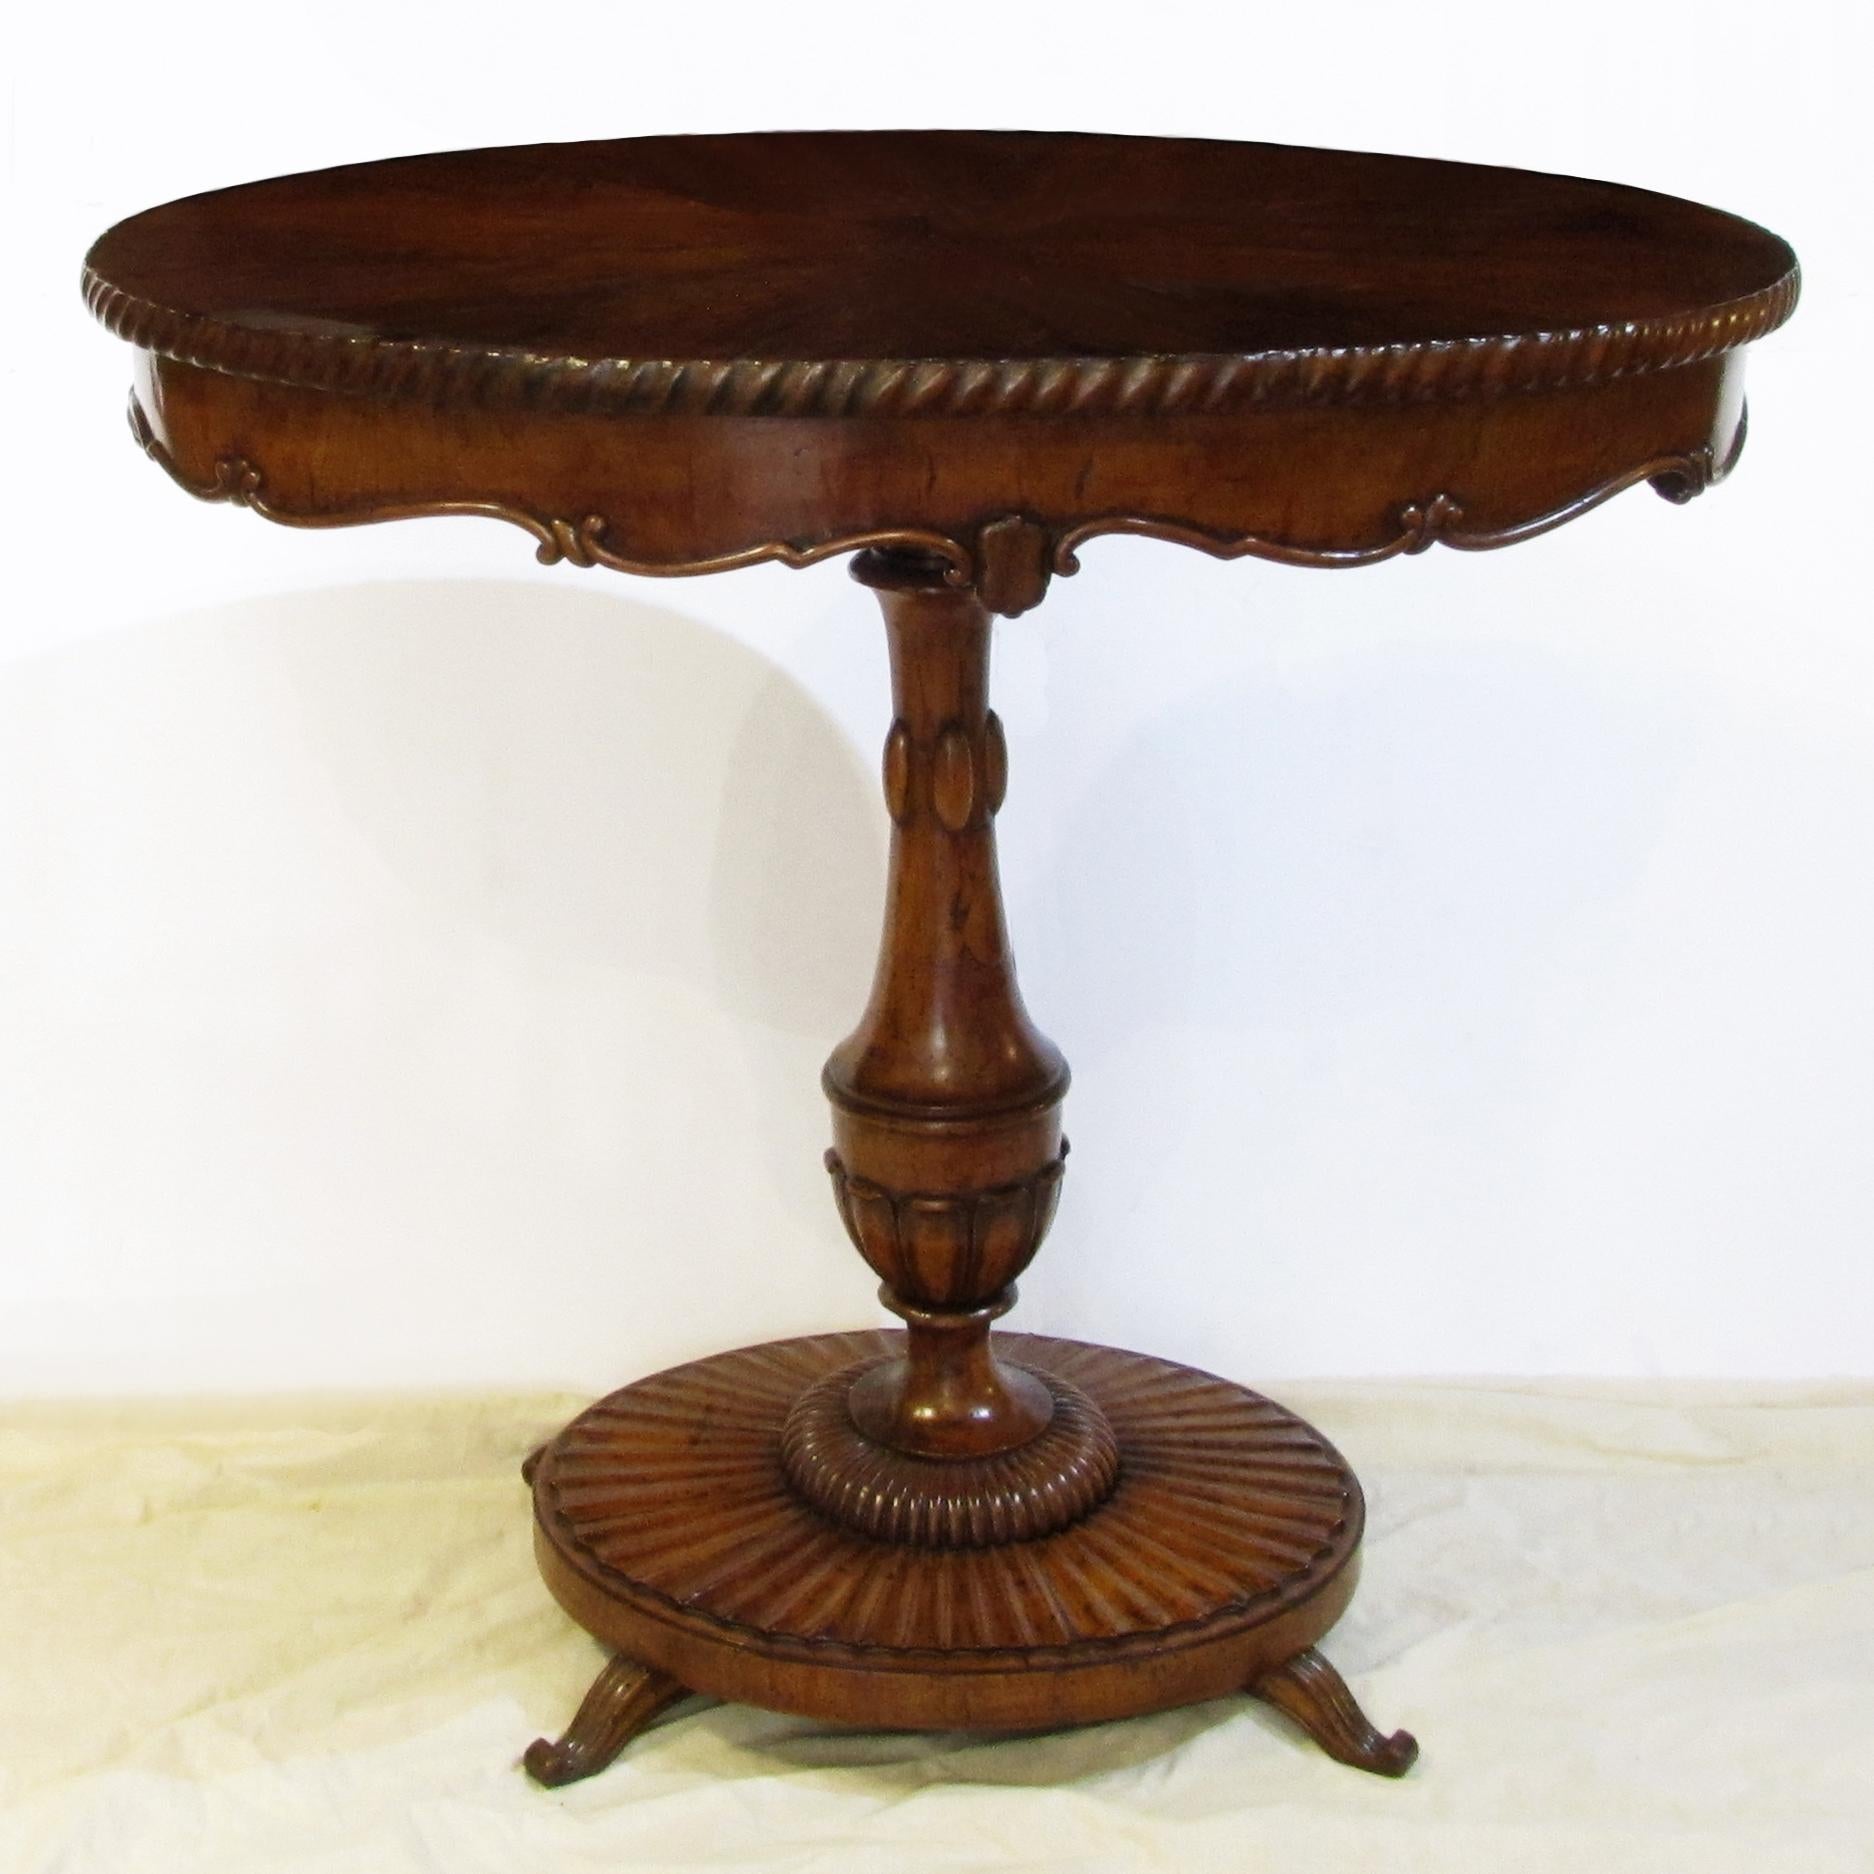 Italian EARLY 19th CENTURY OVAL COFFEE TABLE For Sale